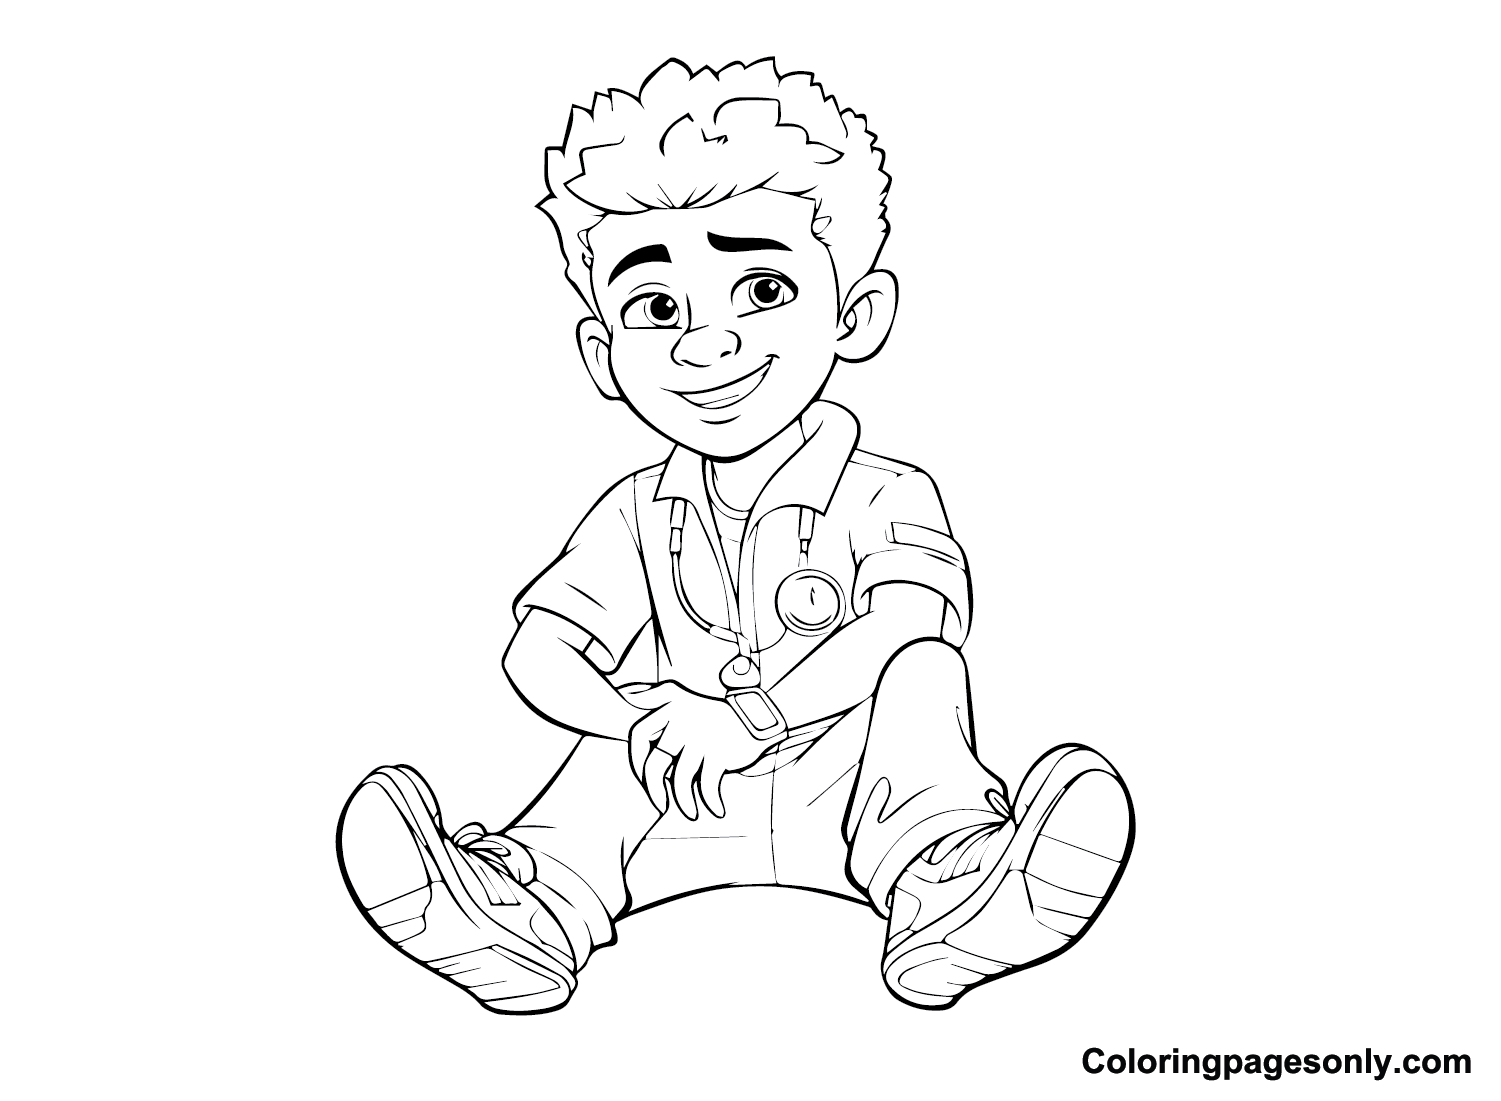 Printable Blueface Coloring Page